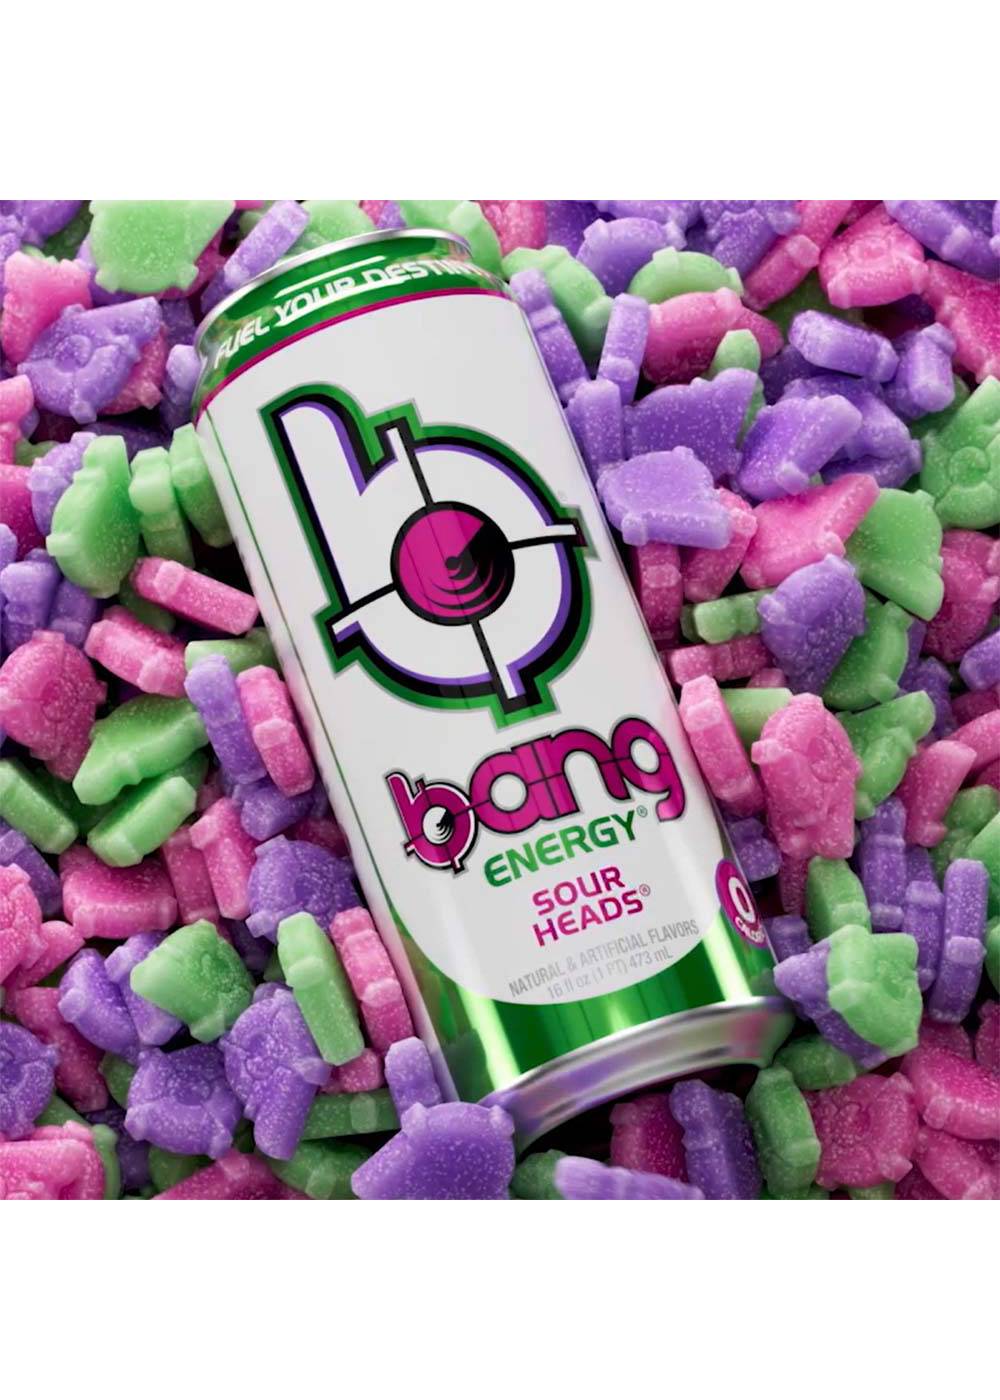 Bang Energy Drink - Sour Heads; image 2 of 2